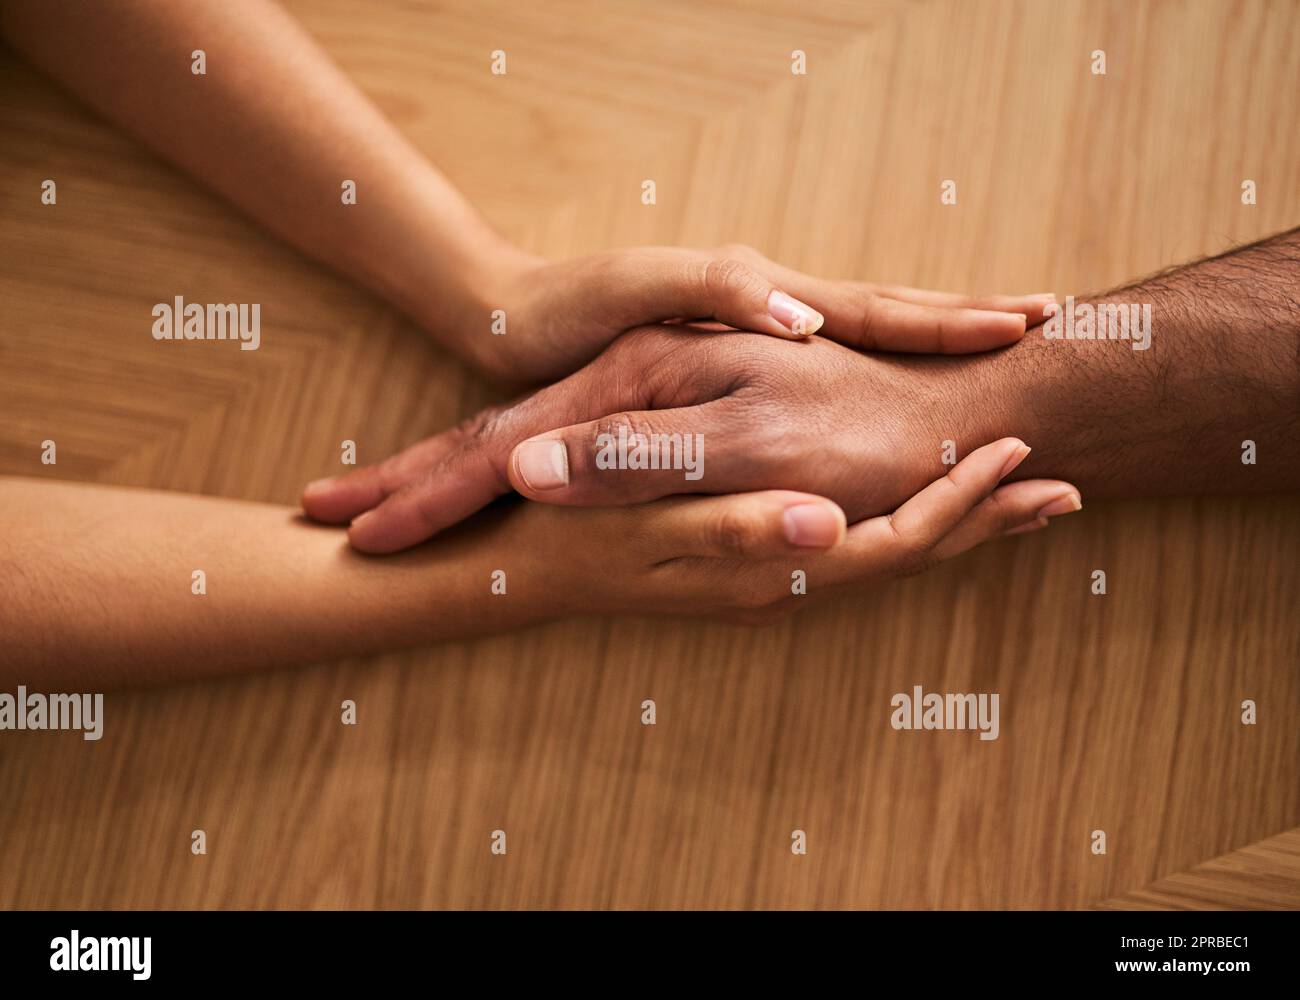 Holding hands in love and support, showing care, comfort and consoling a friend. Two people together in unity, solidarity and trust, showing hope, faith and kindness while helping and bonding closeup Stock Photo